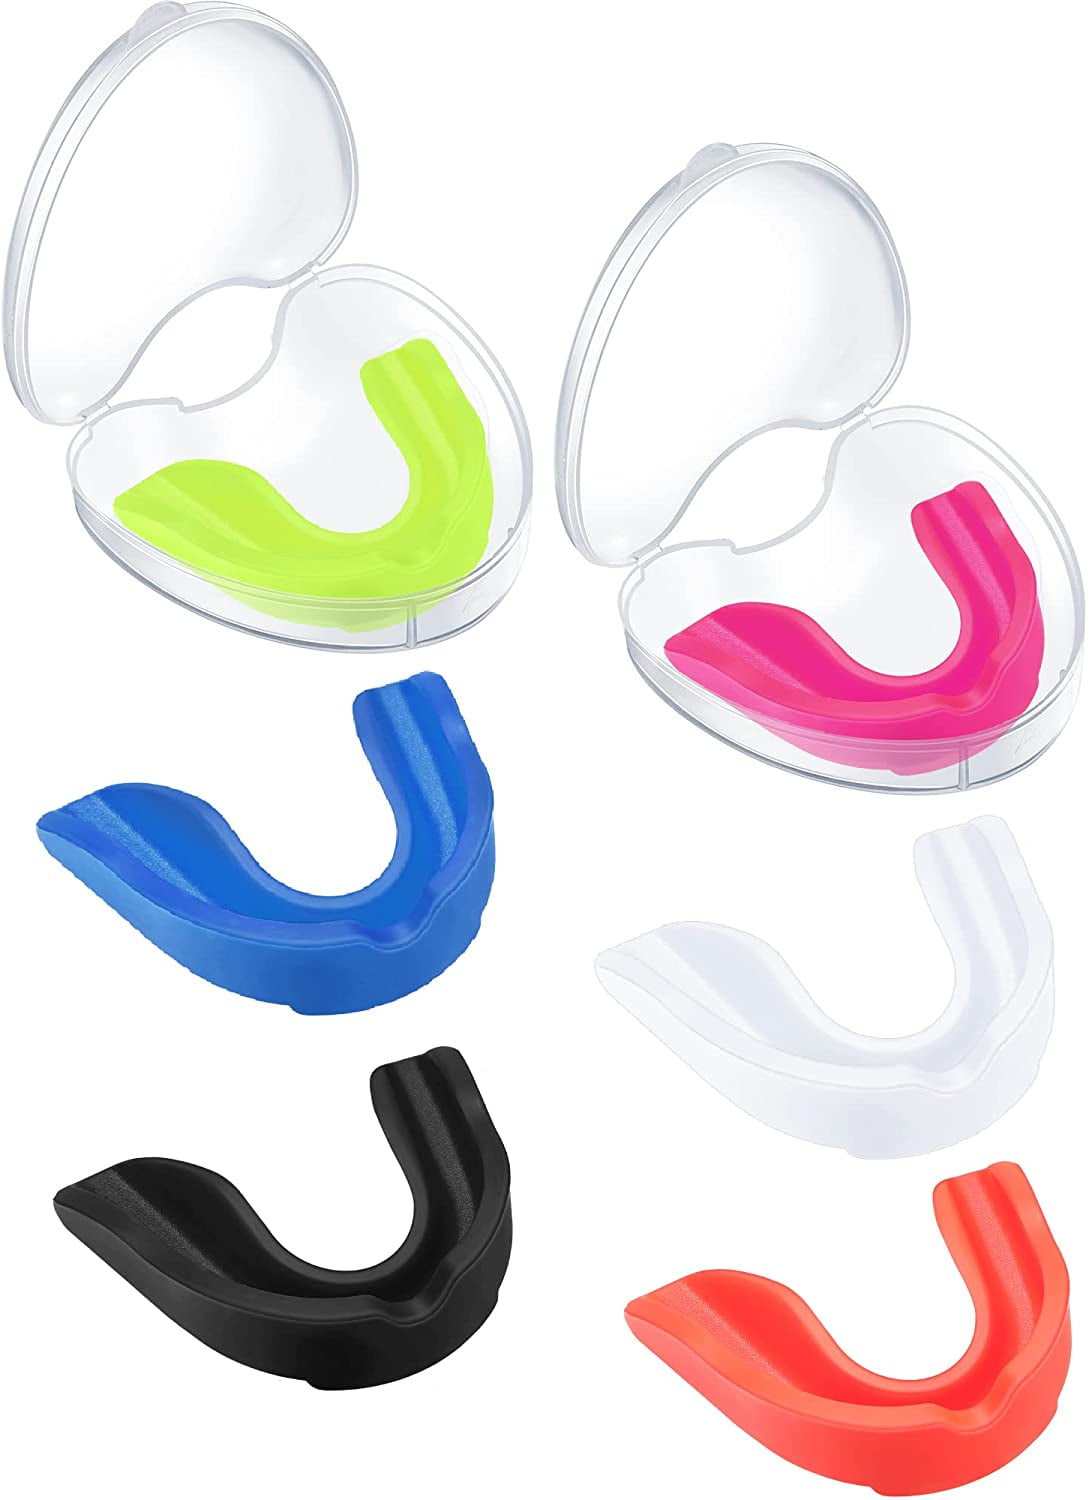 Pink Mouth Guard Mouthguard Piece Teeth Protection Karate Football NEW 